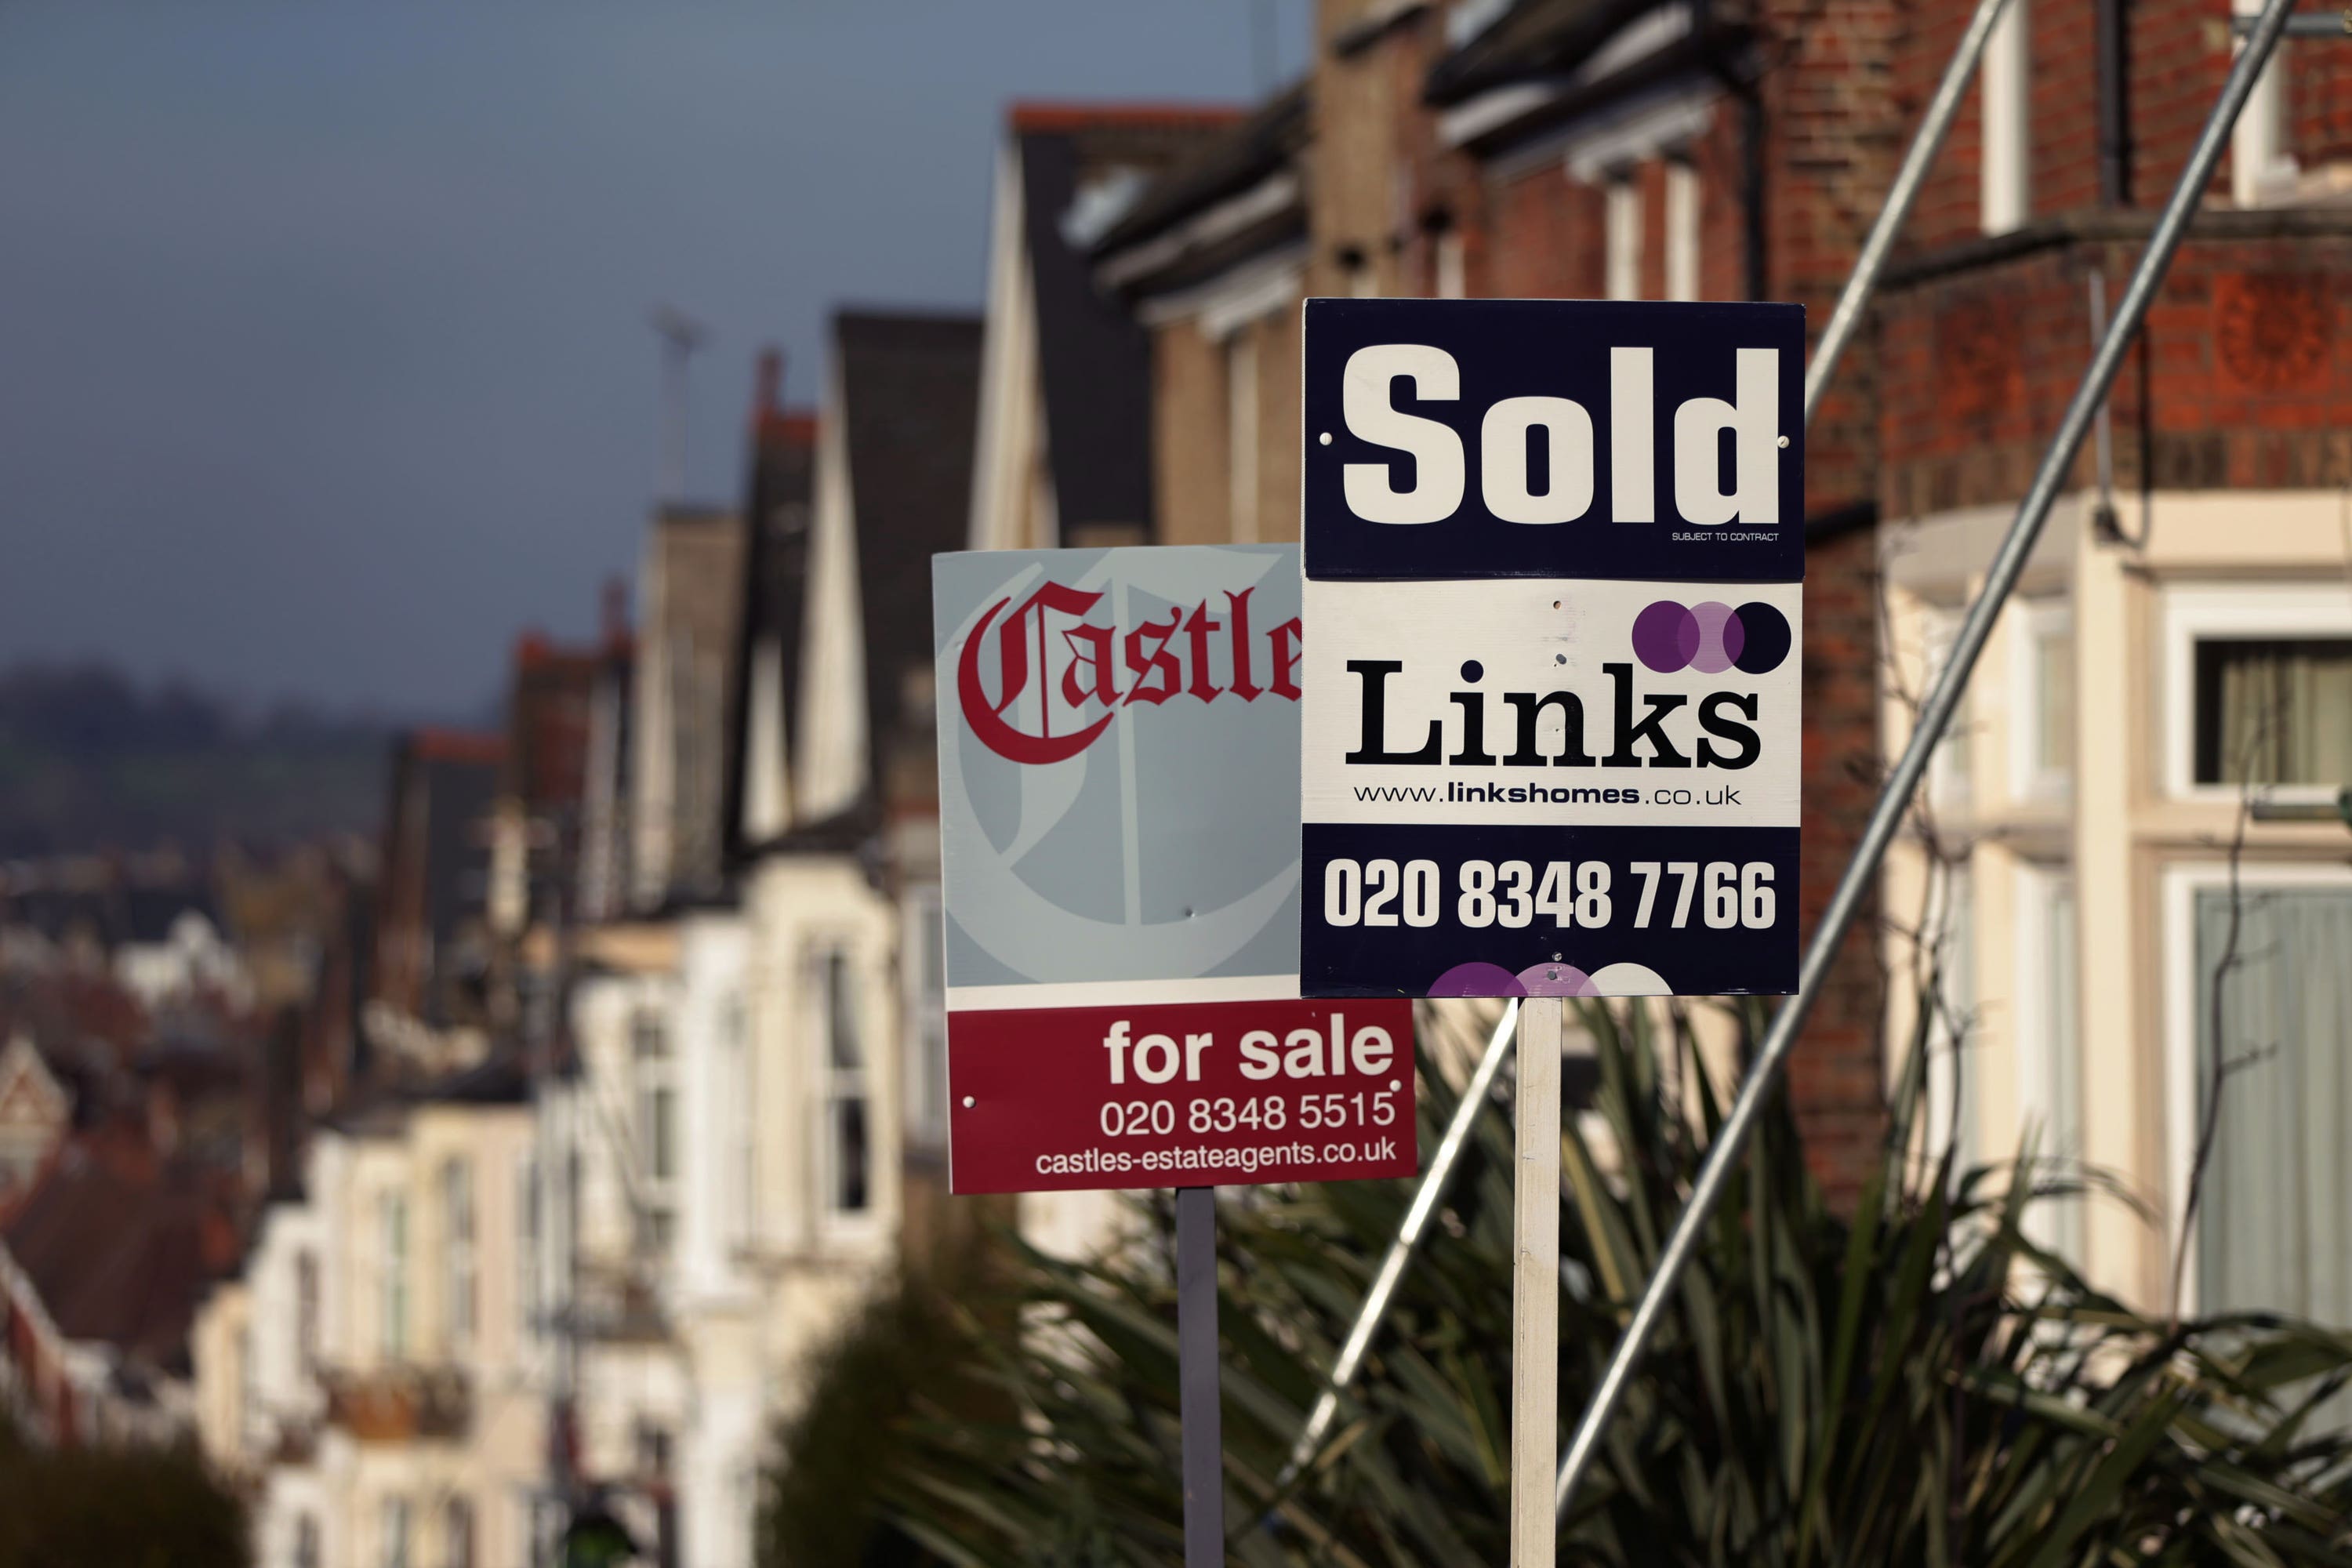 House prices fell back slightly by 0.1 per cent in September